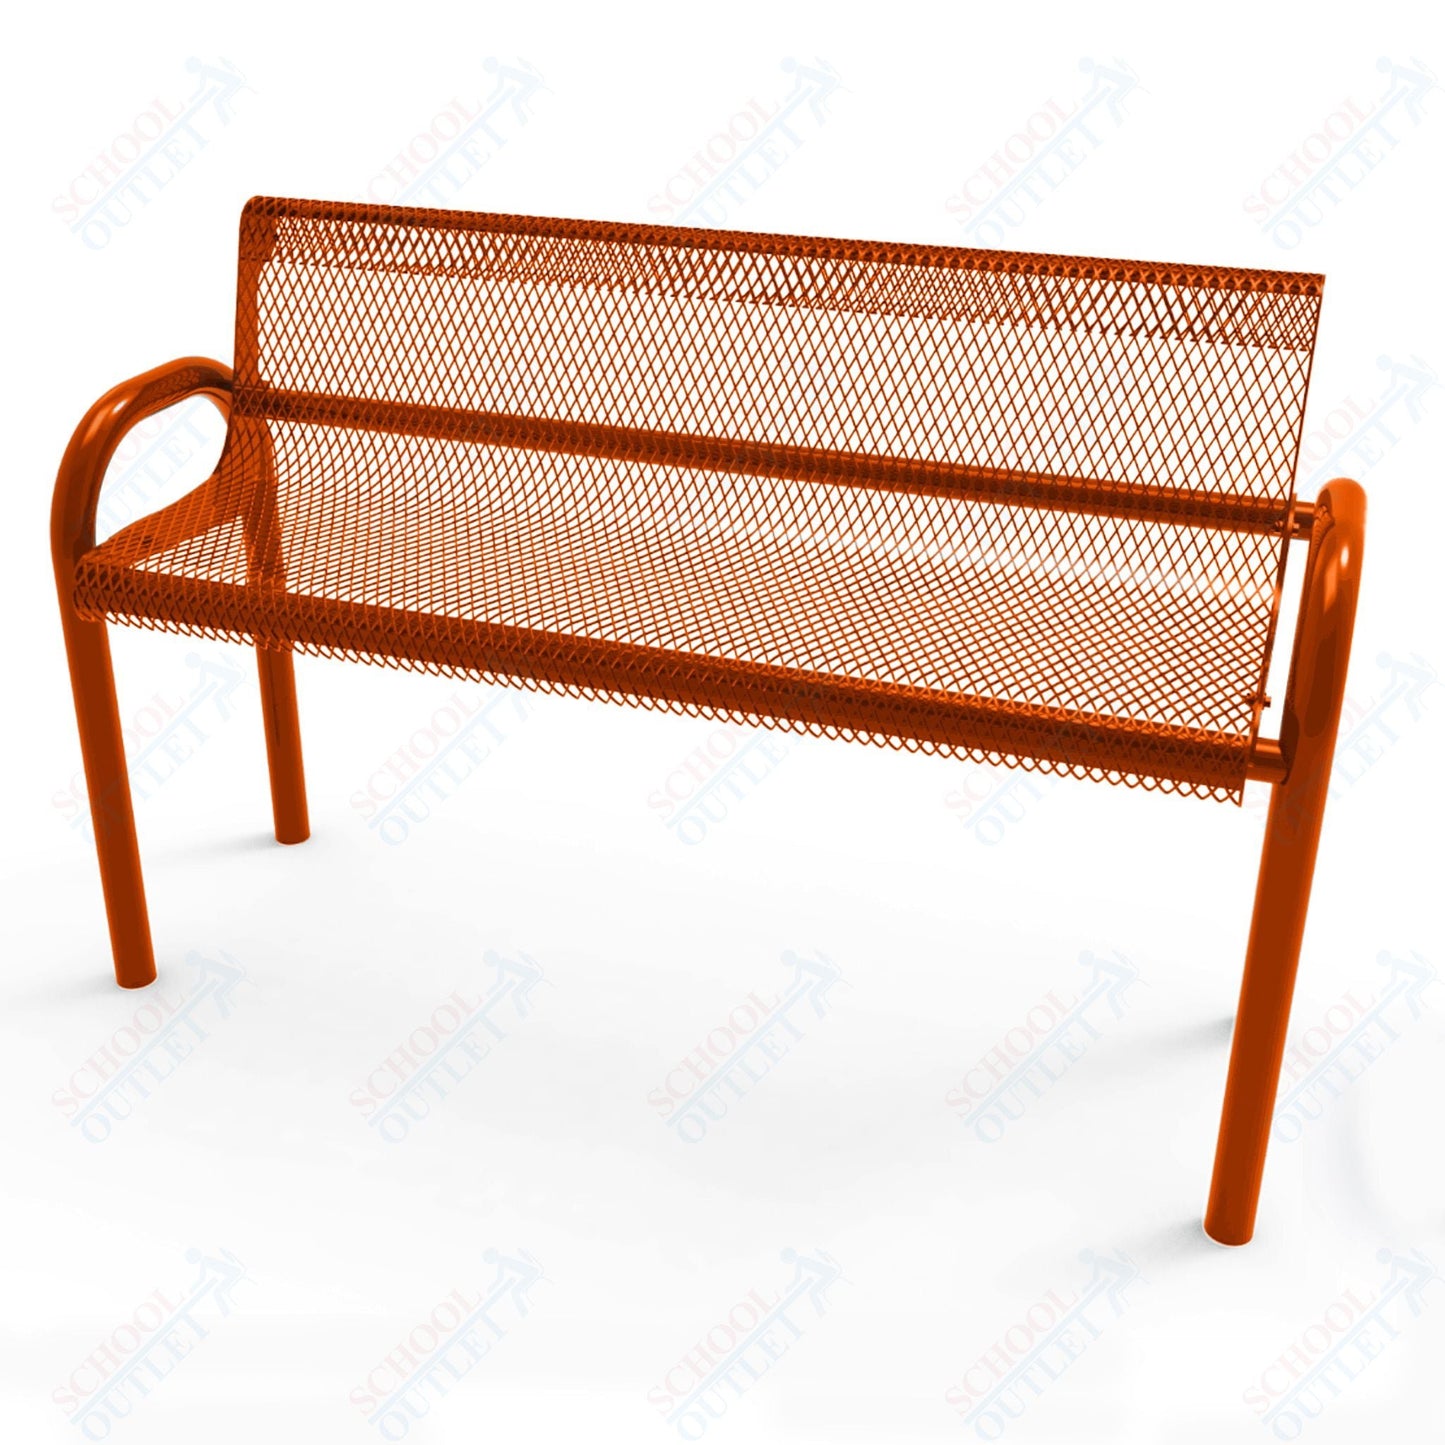 MyTcoat - MOD Outdoor Bench with Back - Inground Mount 4' L (MYT - BMD04 - 53) - SchoolOutlet